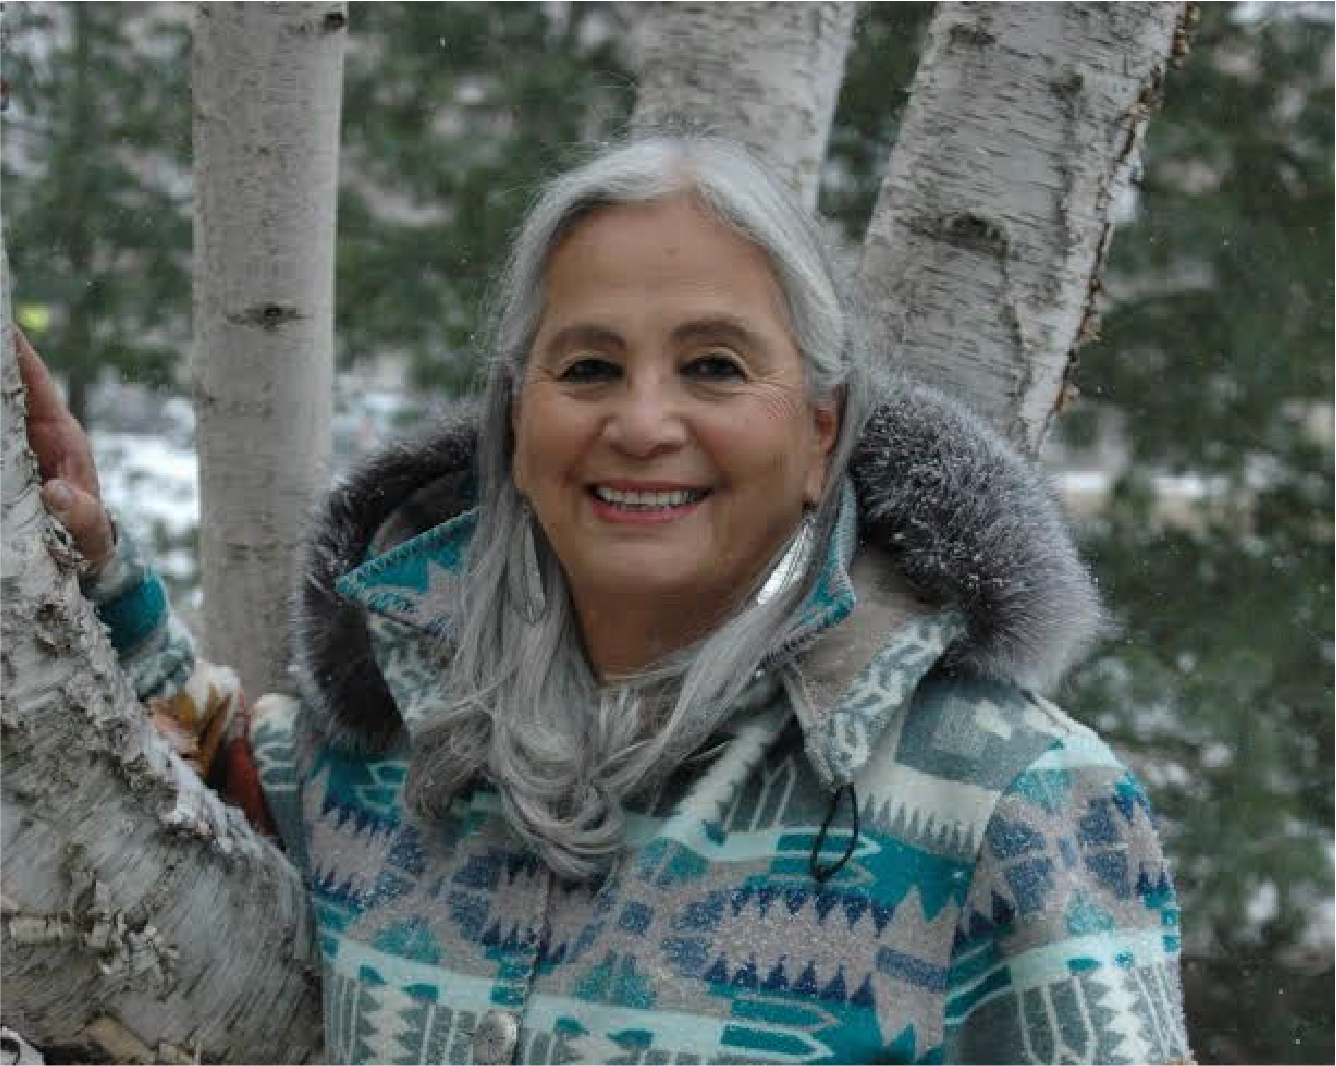 Dr. Denise Lajiimodiere, big toothy smile, long grey hair, wearing a bright-colored Tribal coat outside during a cold winter day, standing at the base of large birch trees